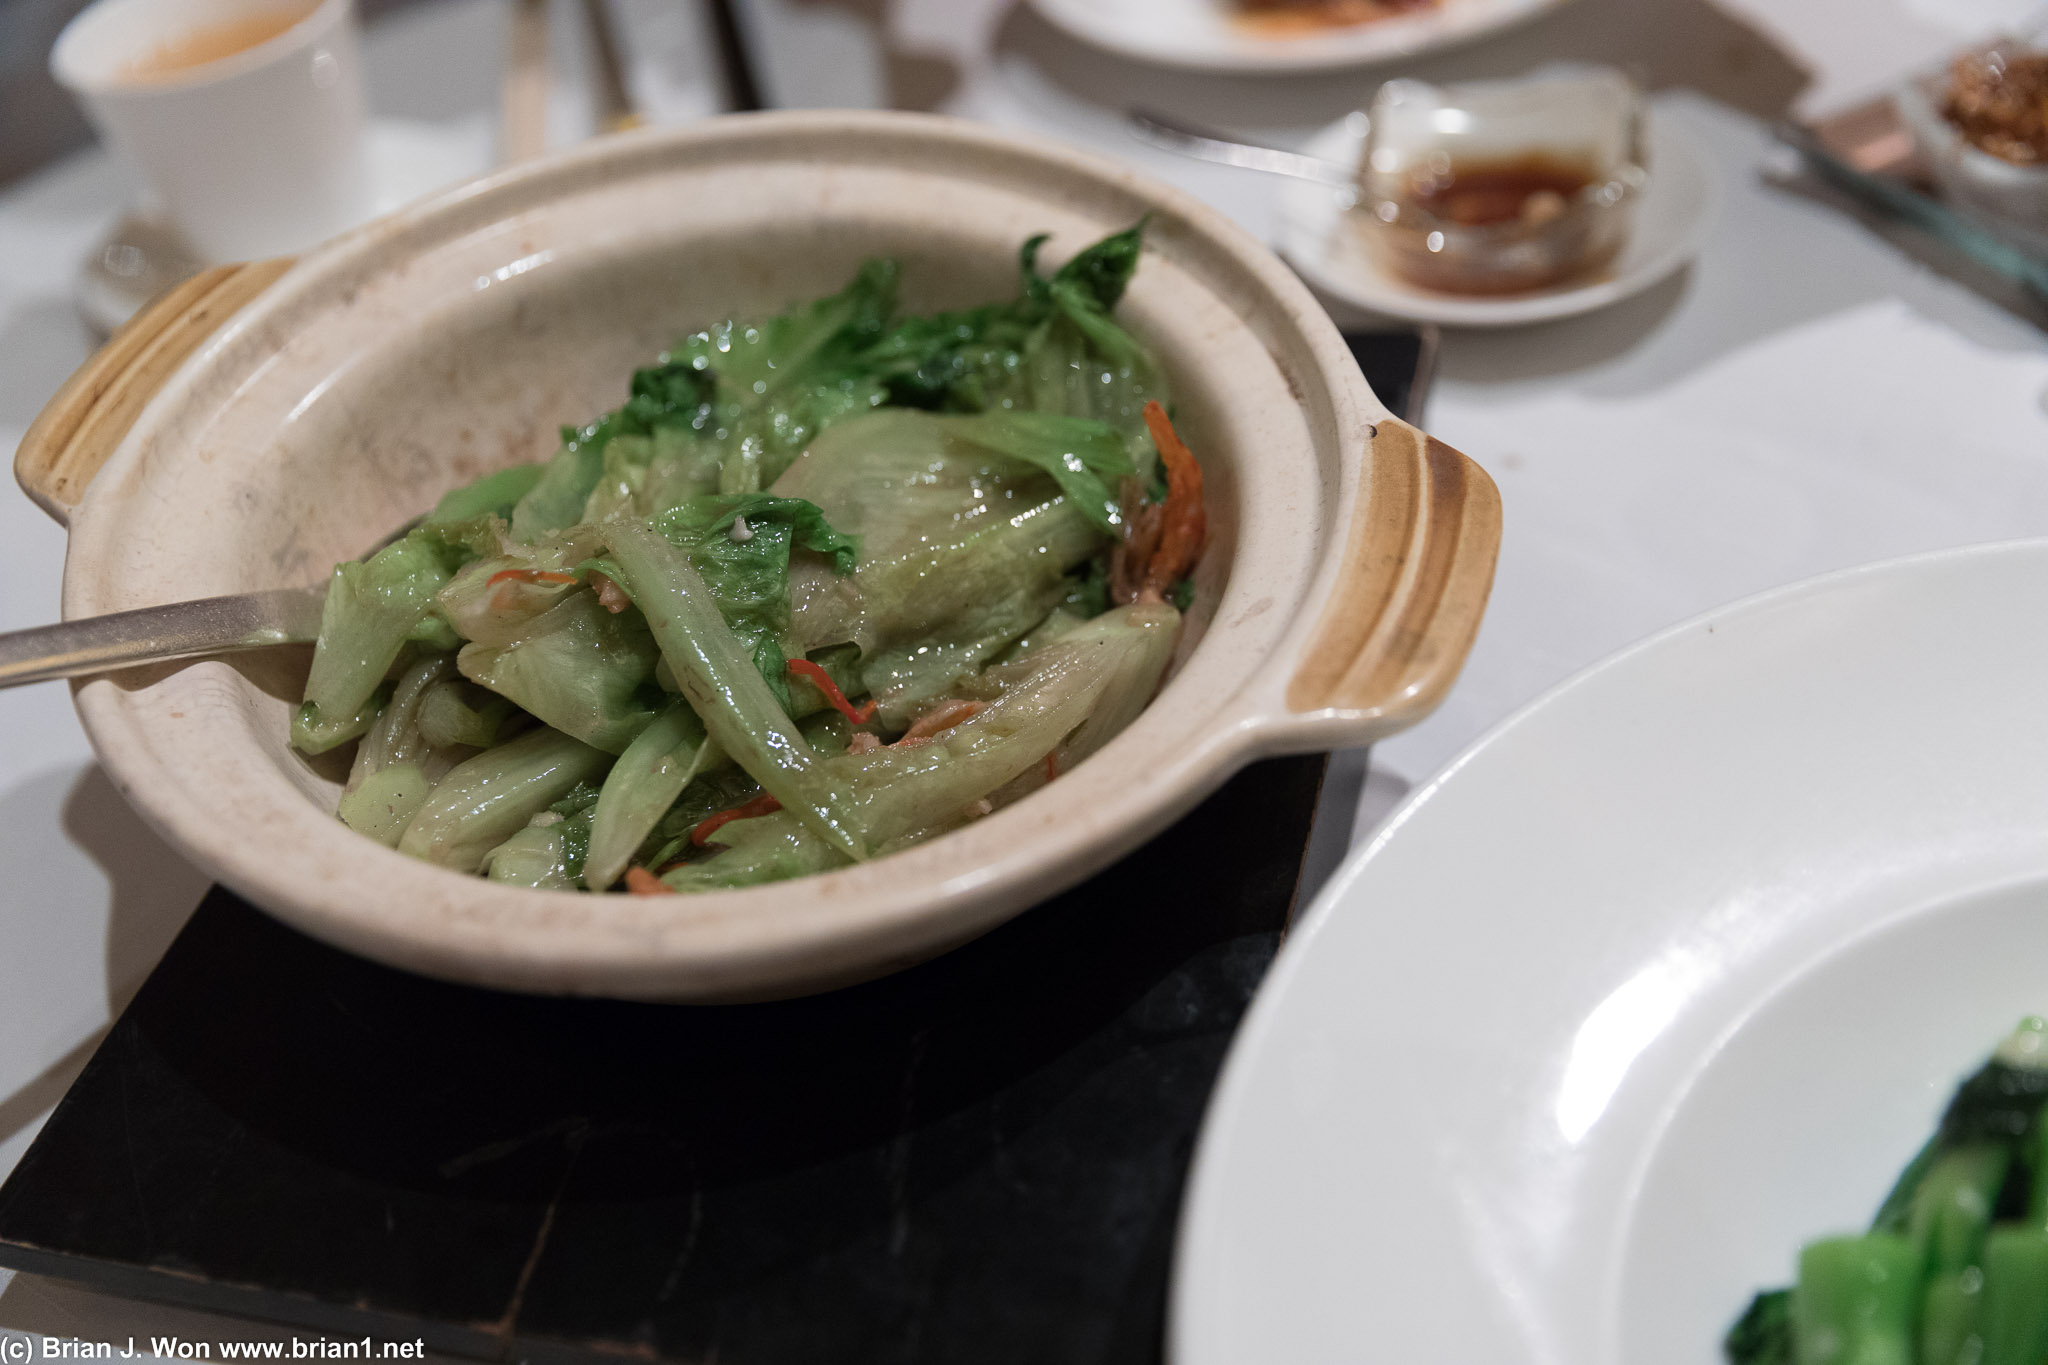 Lettuce with dried shrimp clay pot. Quite intense as they added shrimp paste, too.